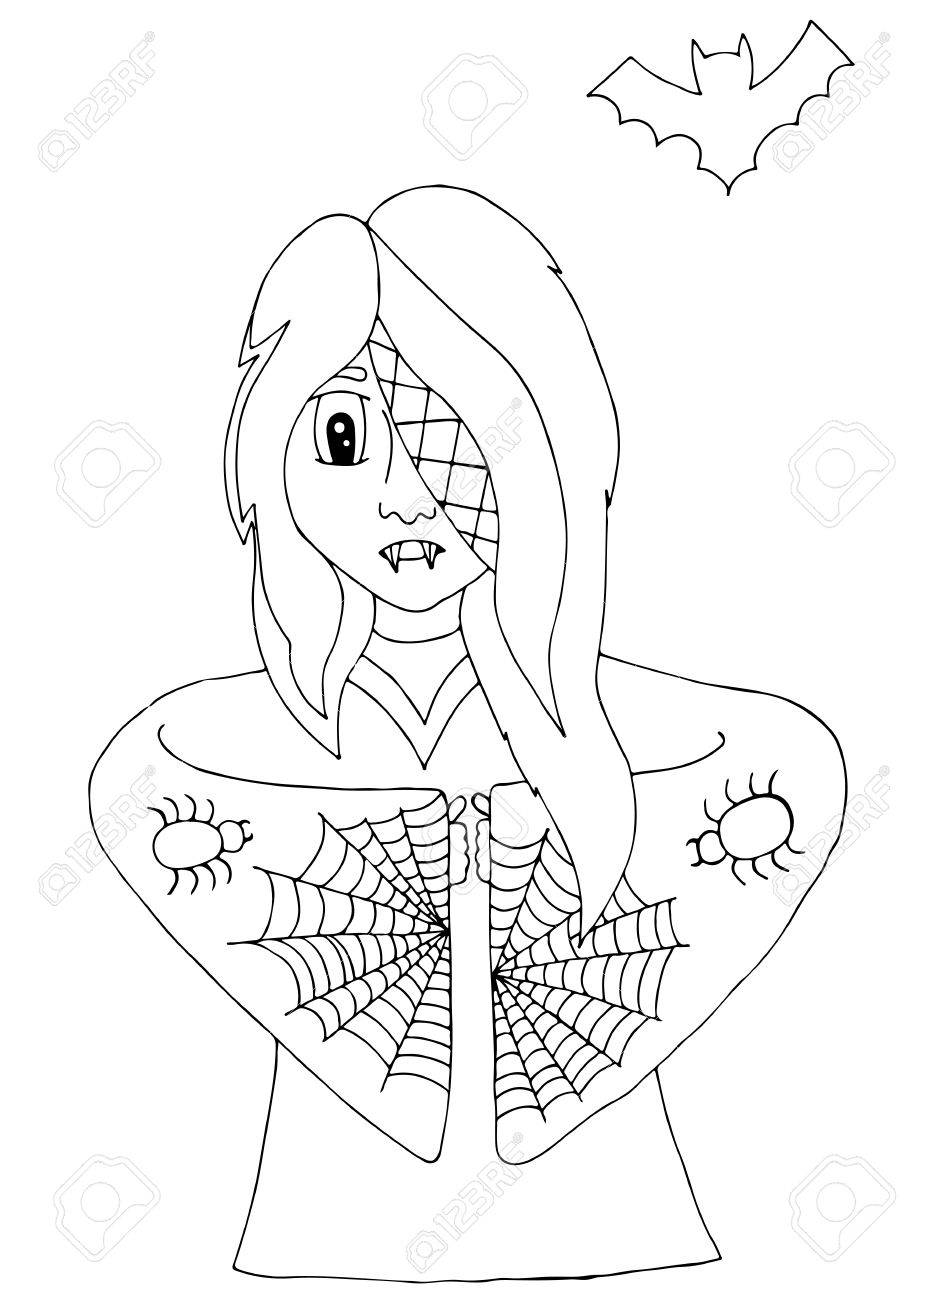 Girl vampire in clothes with a spider web and spiders mono color black line art element for adult coloring book page design royalty free svg cliparts vectors and stock illustration image